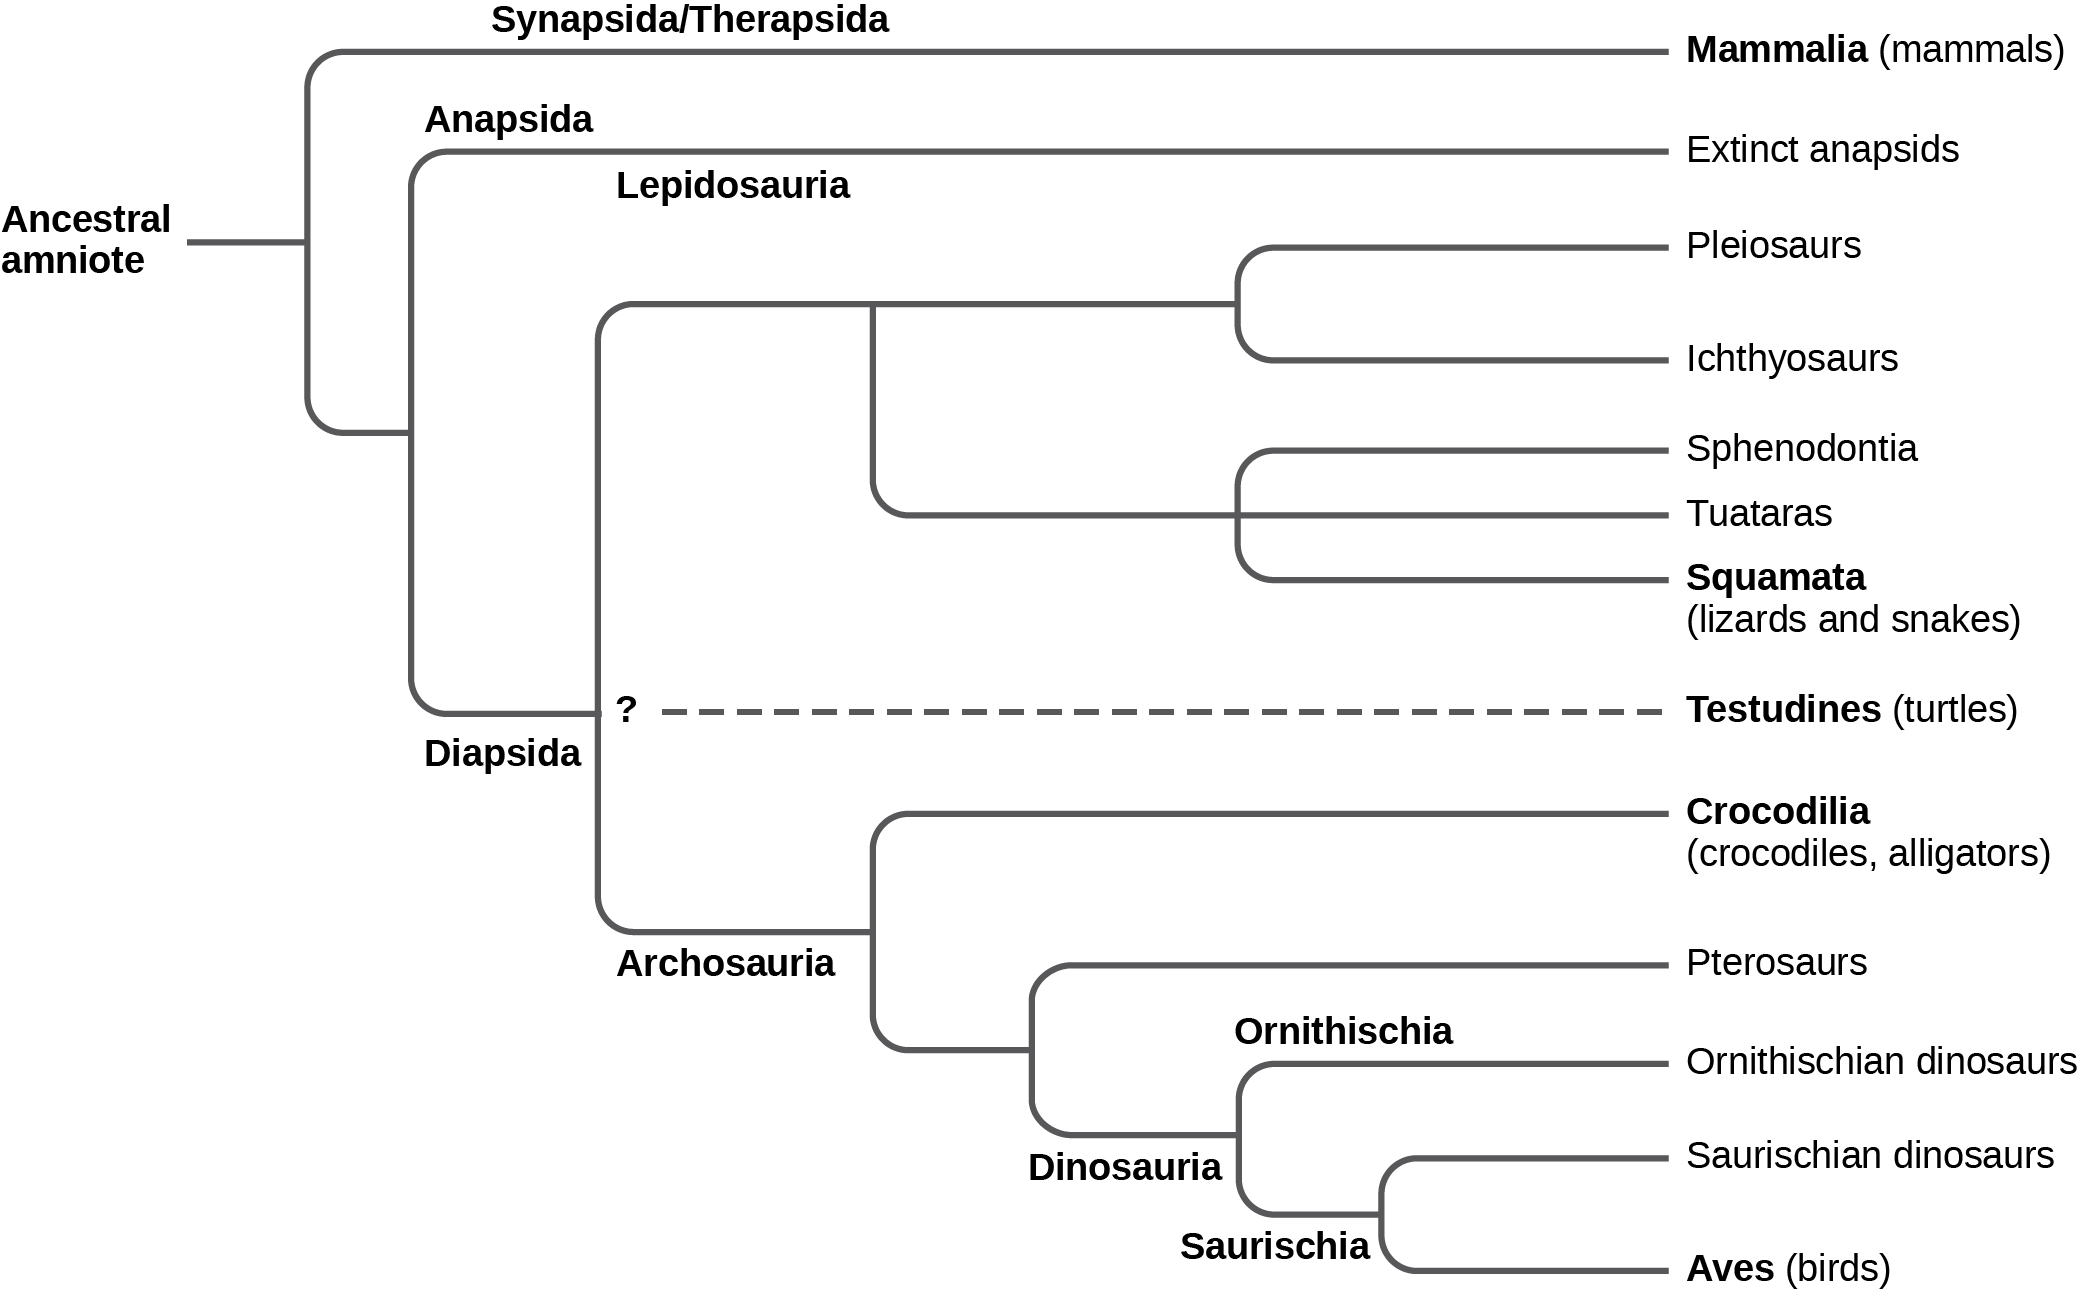 The trunk of the amniote phylogenetic tree is the ancestral amniote. Initially, the tree branches into diapsids, anapsids, and synapsids. Synapsids give rise to mammals, which are therapsids. Anapsids are all extinct. Diapsids are subdivided into two groups, lepidosaurs and archosaurs. Lepidosauria includes plesiosaurs, ichthyosaurs, Sphenodontia and Squamata, which includes lizards and snakes. Archosauria branches into Crocodilia, pterosaurs, dinosaurs, and birds.